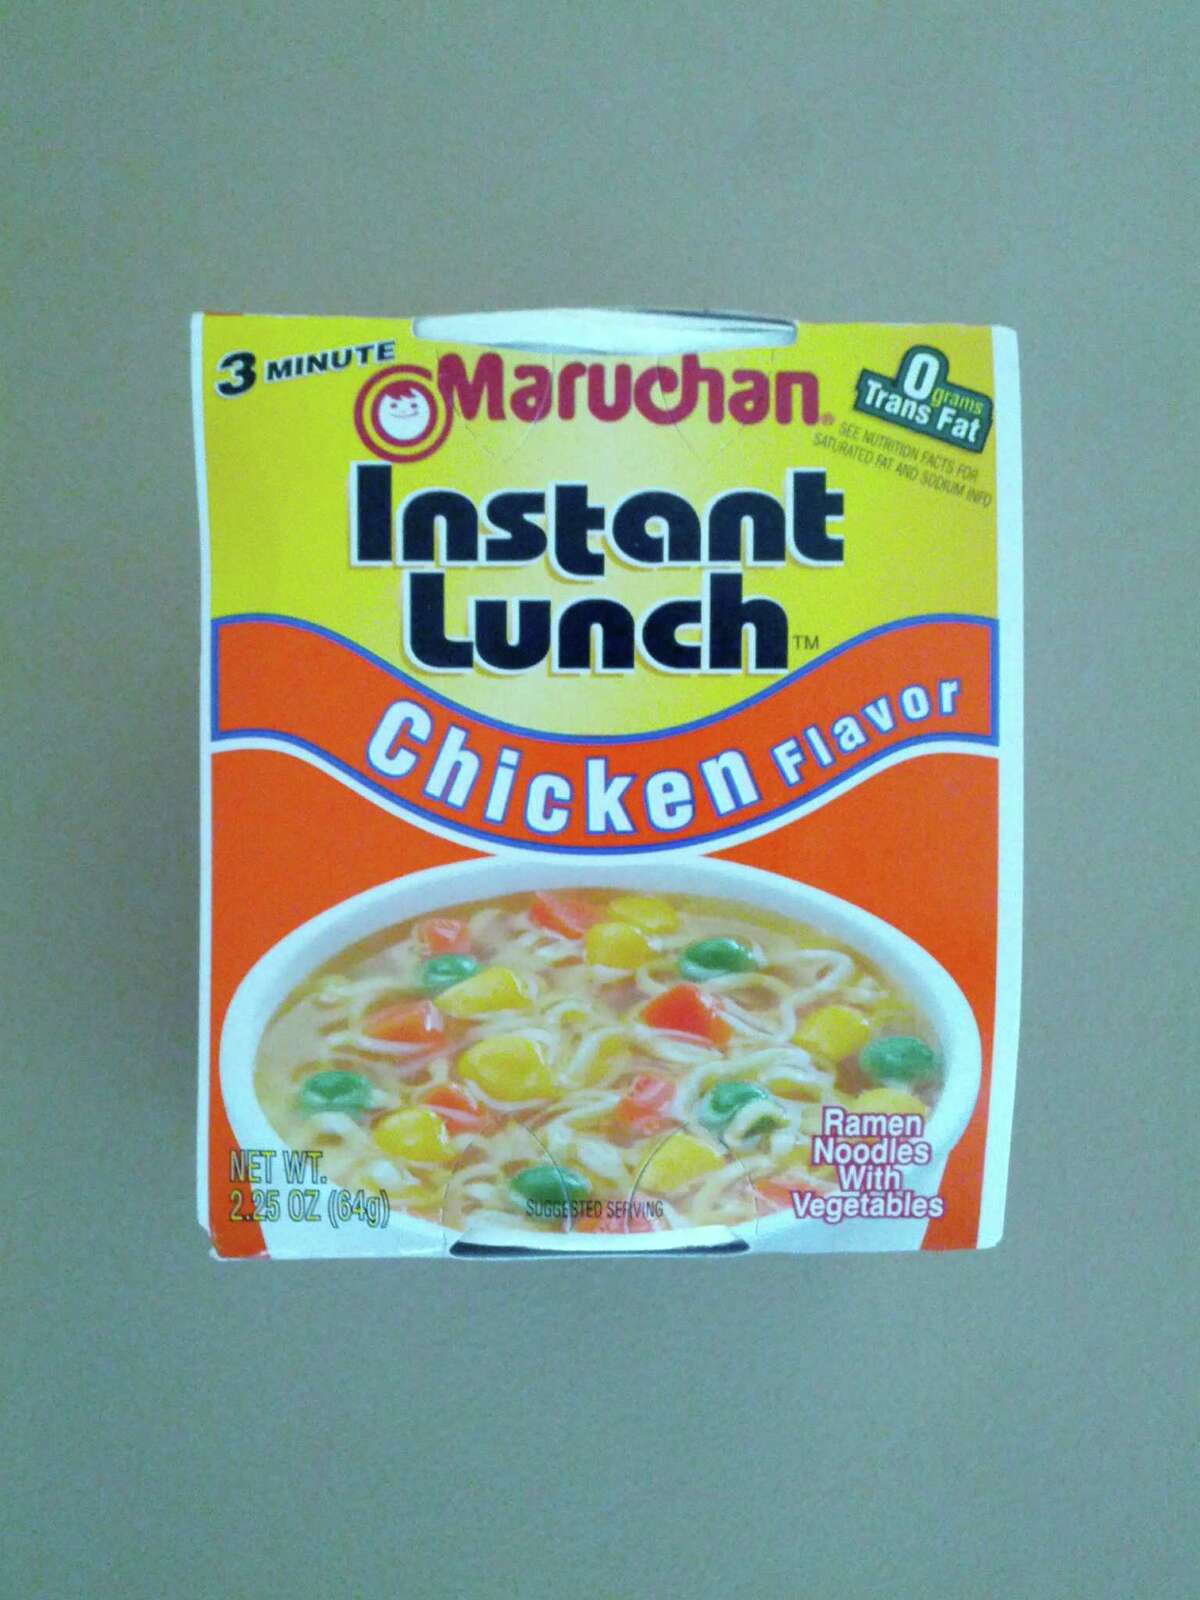 Maruchan's Instant Lunch cup of ramen noodles. Readers comment on the type of jobs a proposed Maruchan plant will create.